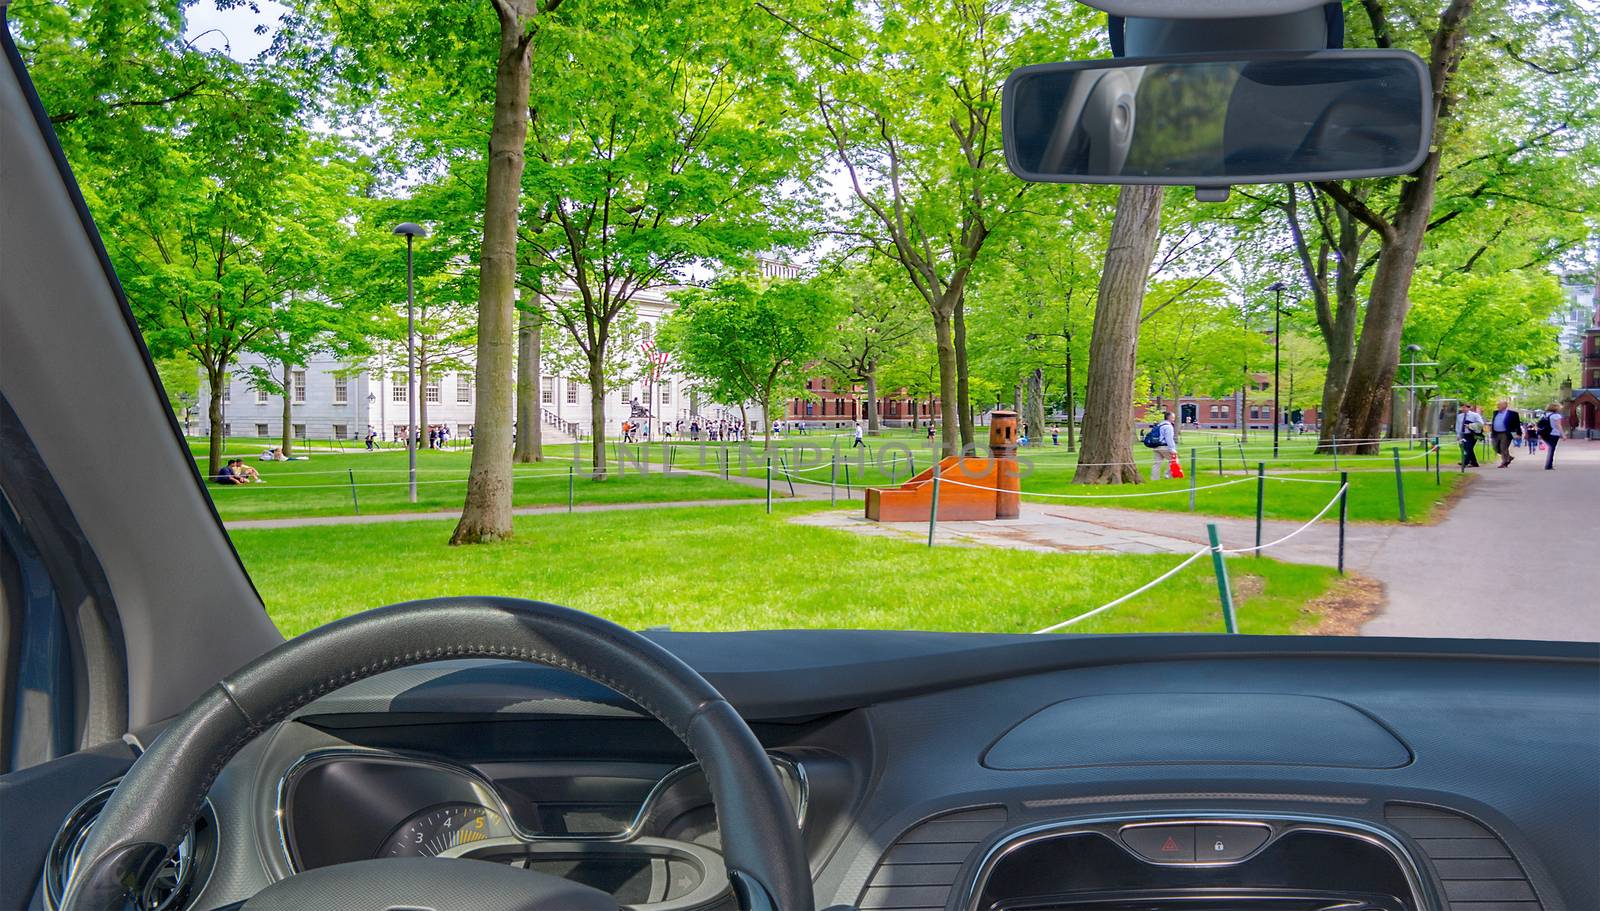 Looking through a car windshield with view of the Harvard University Campus, Cambridge, USA